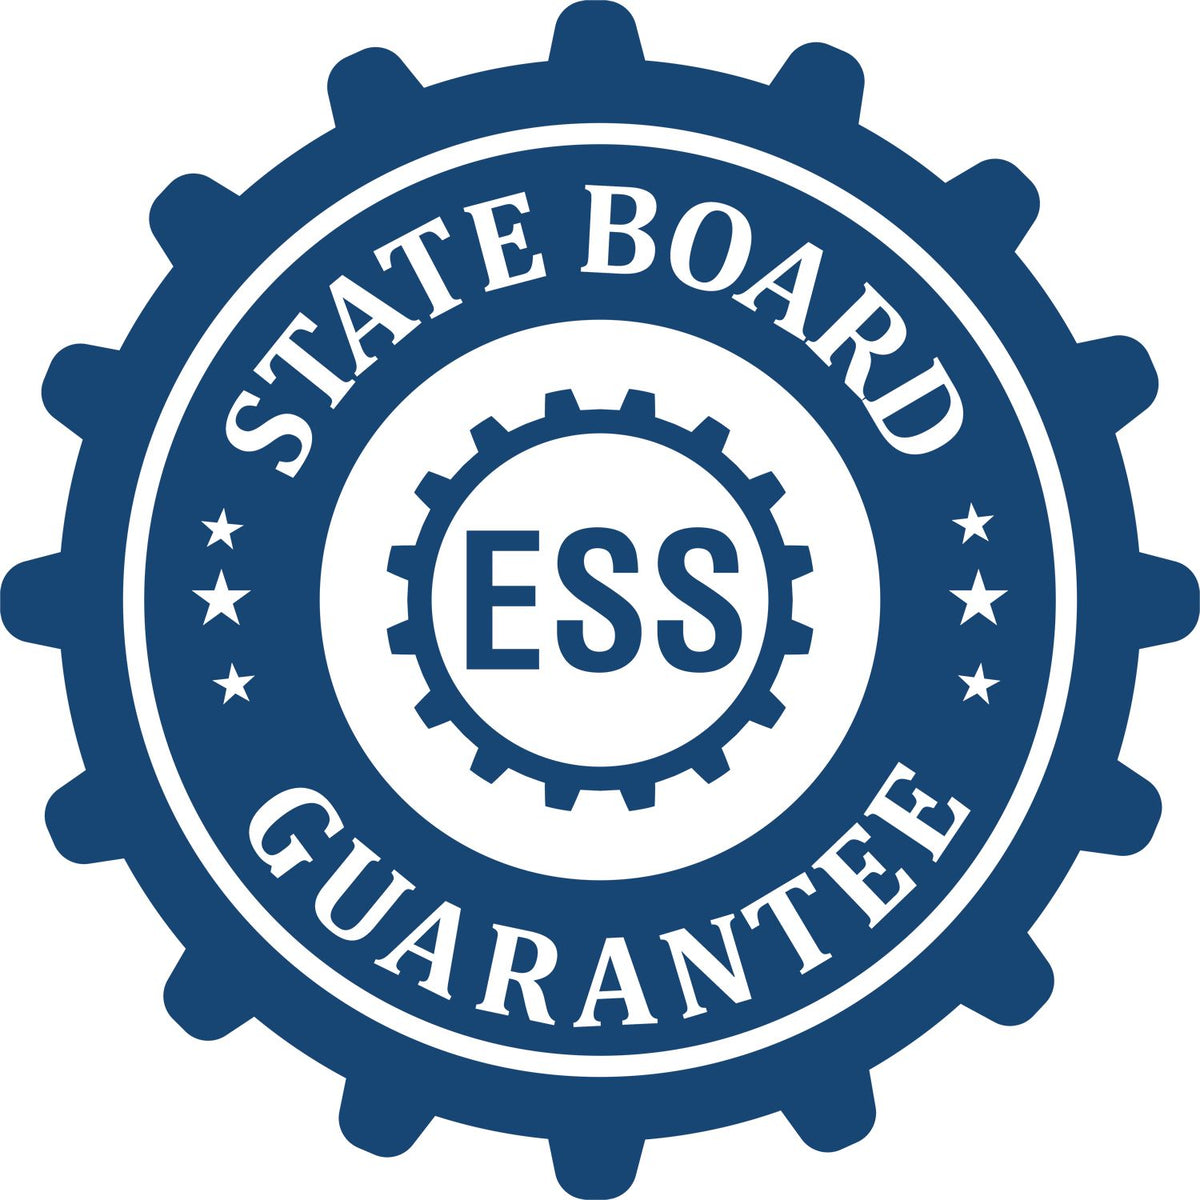 An emblem in a gear shape illustrating a state board guarantee for the Connecticut Desk Architect Embossing Seal product.